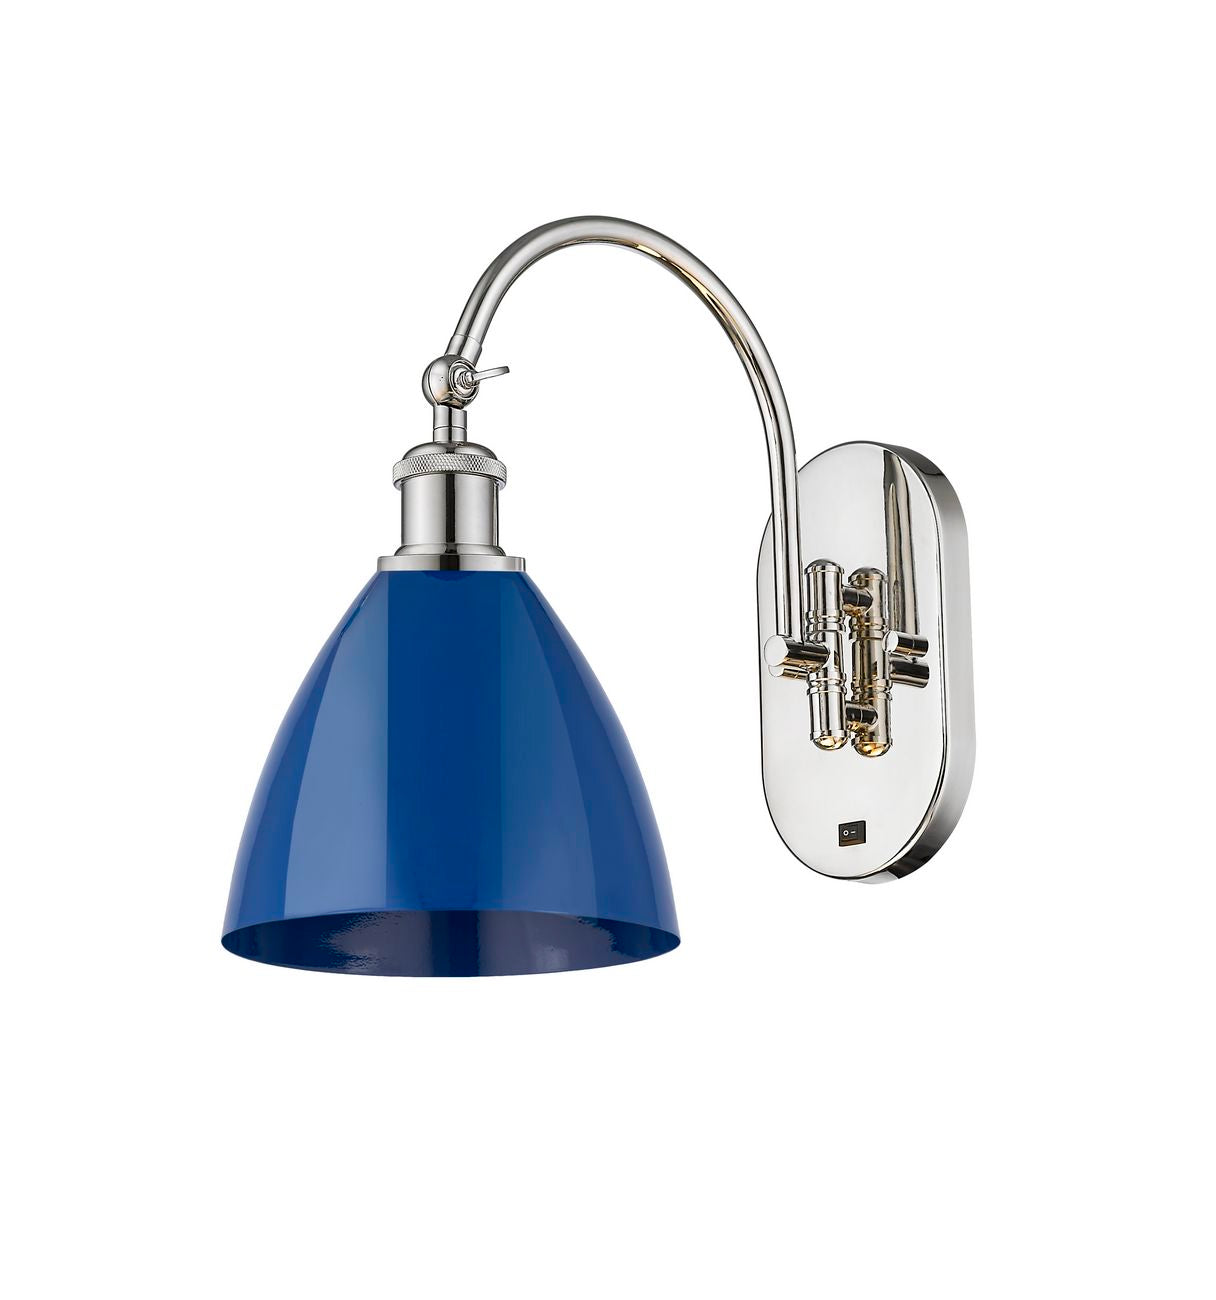 518-1W-PN-MBD-75-BL 1-Light 7.5" Polished Nickel Sconce - Blue Plymouth Dome Shade - LED Bulb - Dimmensions: 7.5 x 13.75 x 13.25 - Glass Up or Down: Yes